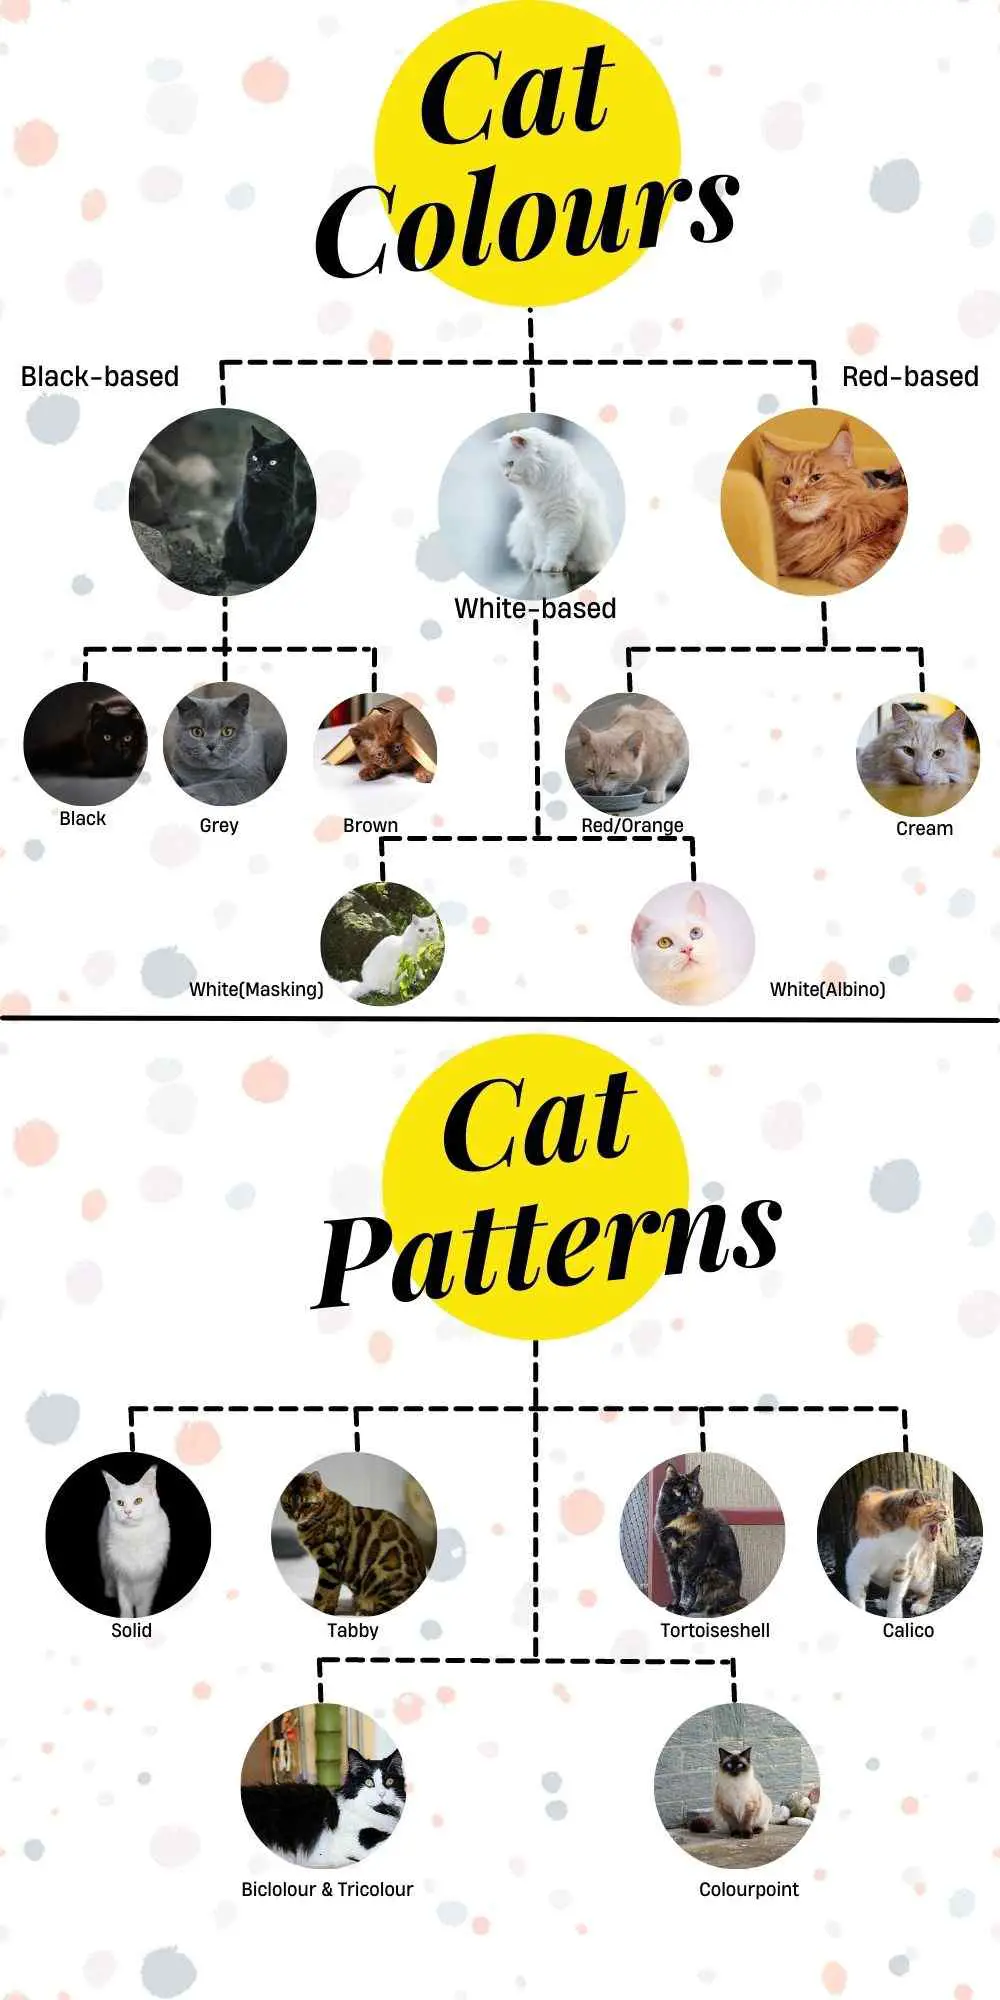 This inforgraphic shows the major colours and patterns found in cats.